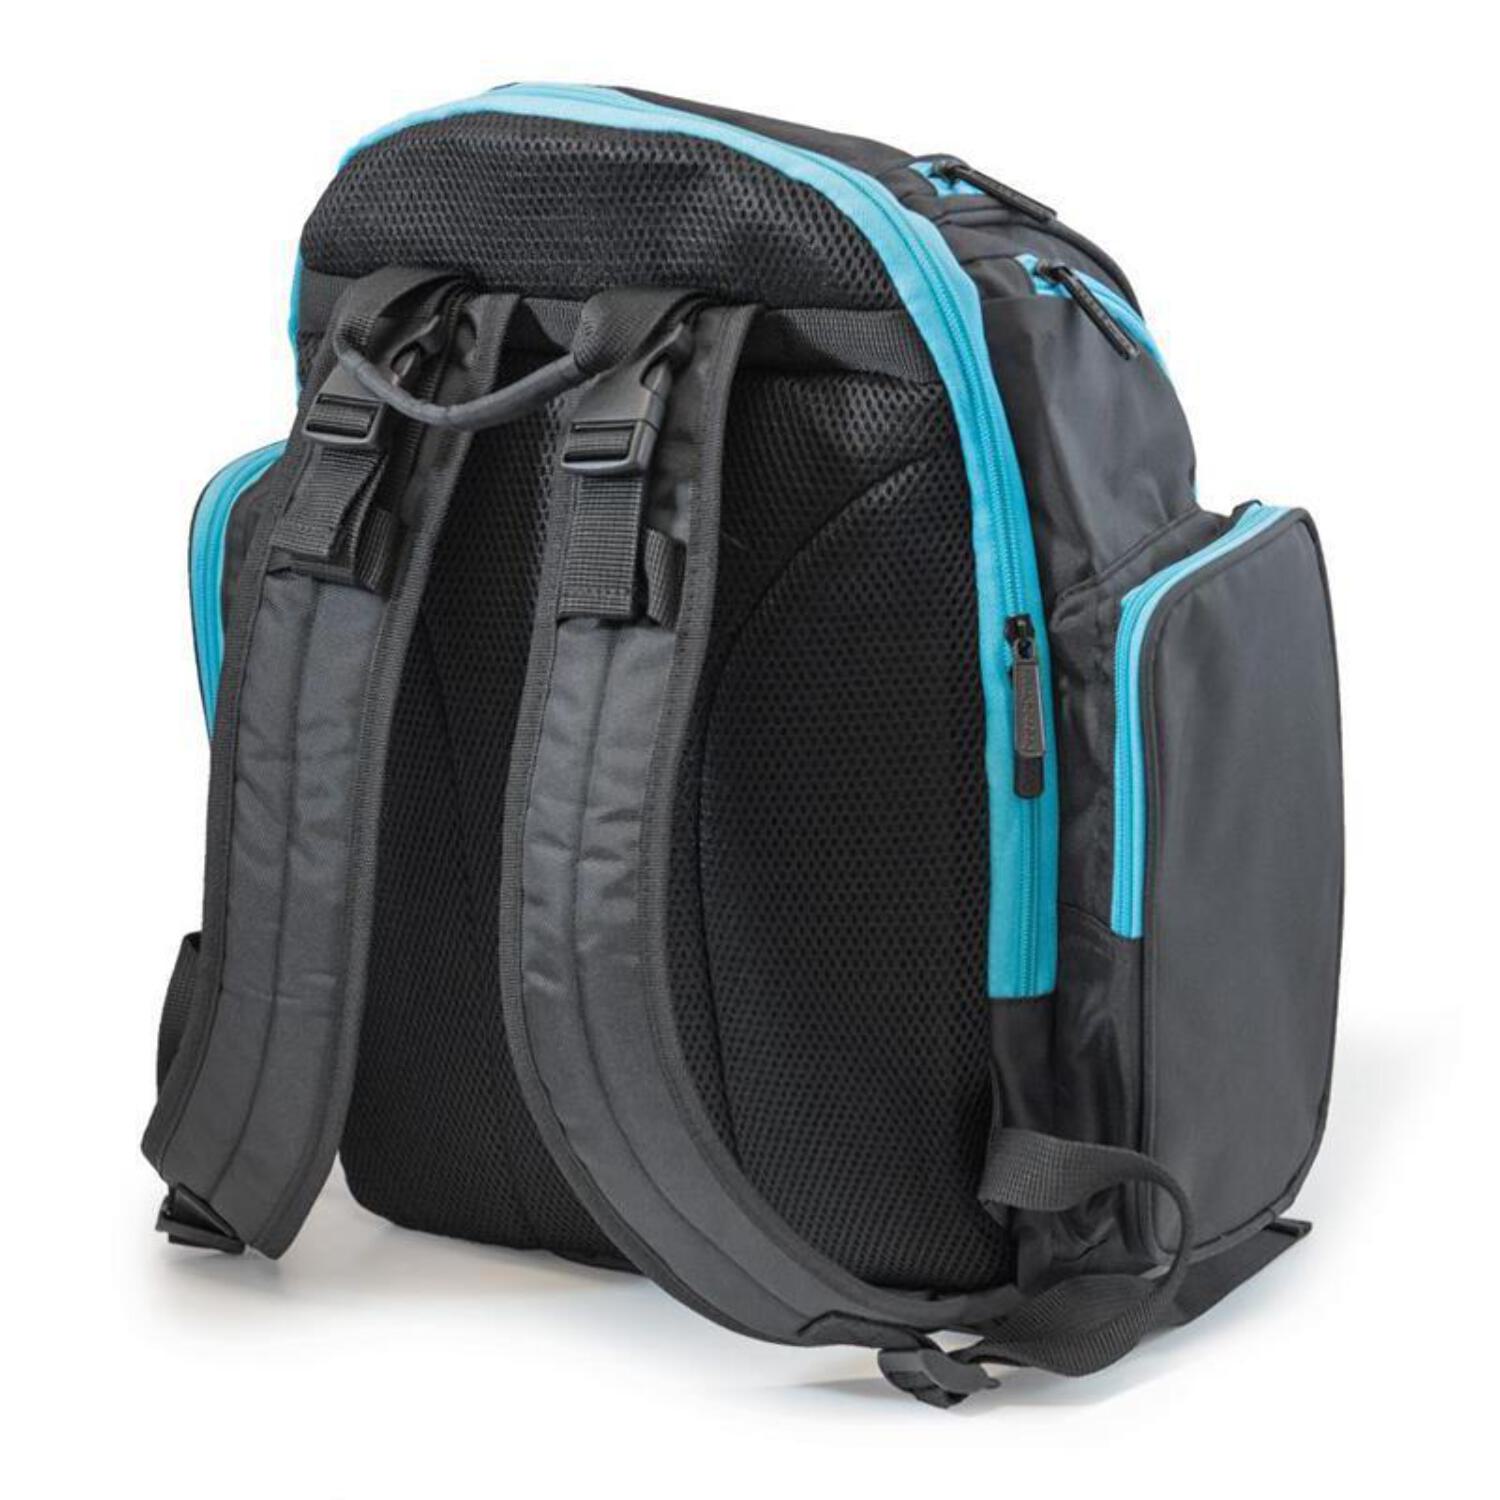 Primo Passi - Blue Backpack Diaper Bag - image 2 of 9